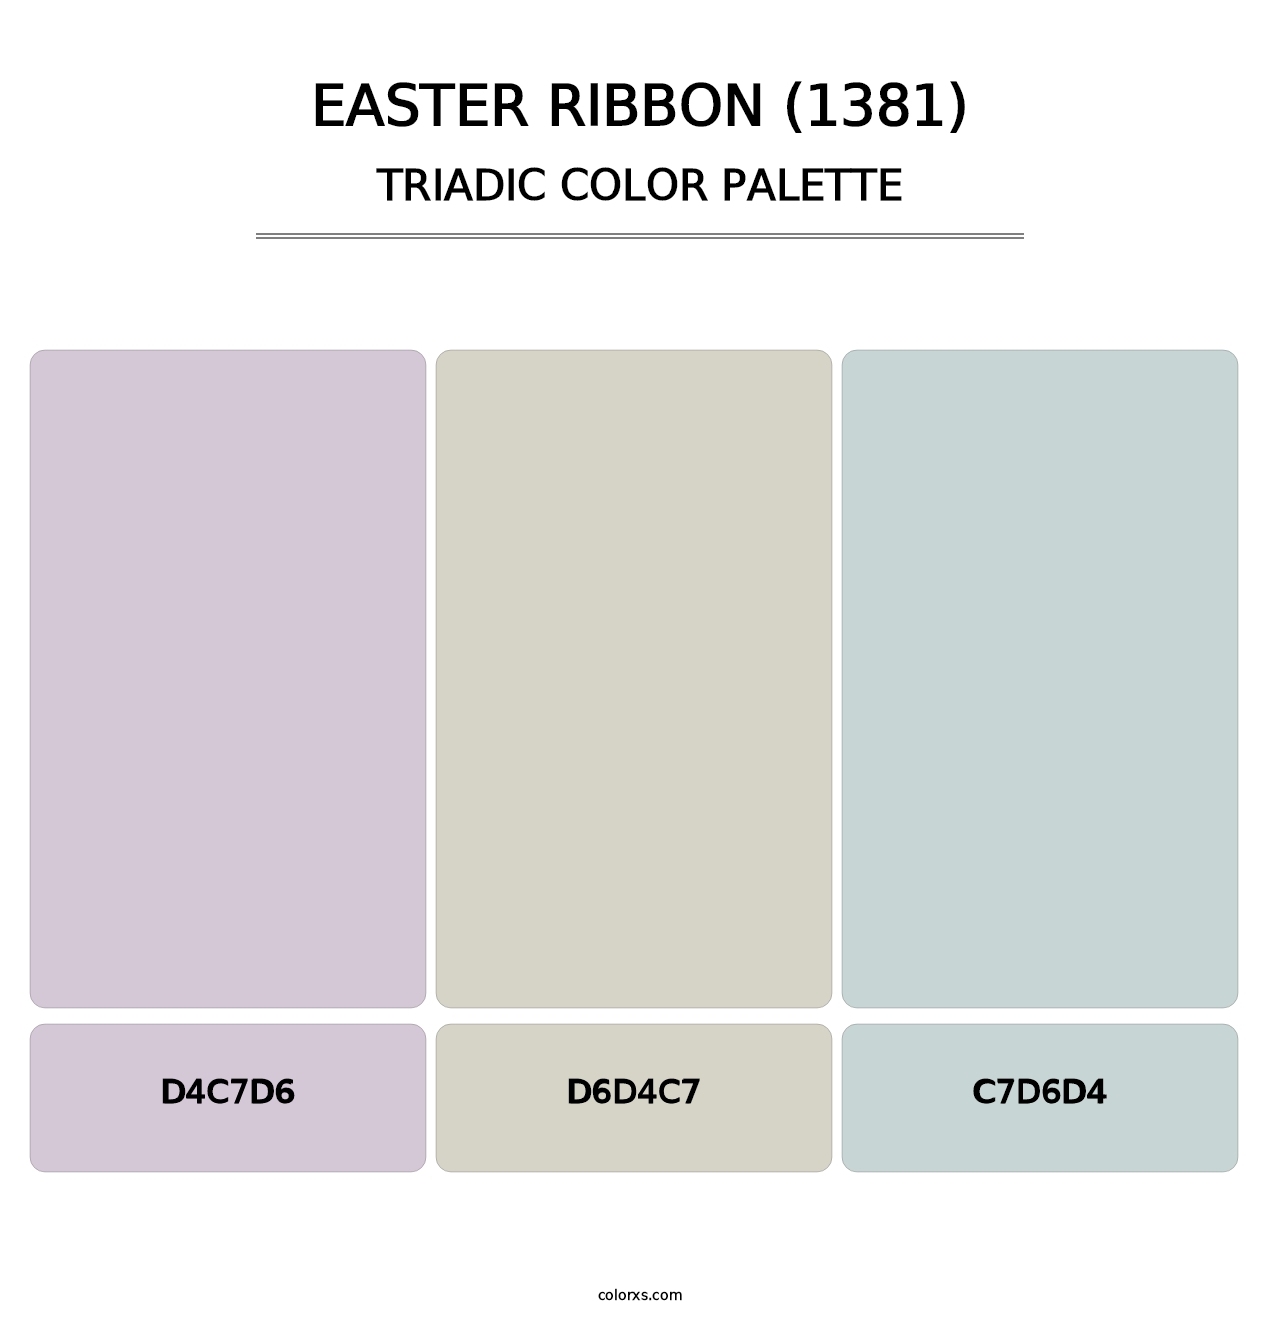 Easter Ribbon (1381) - Triadic Color Palette